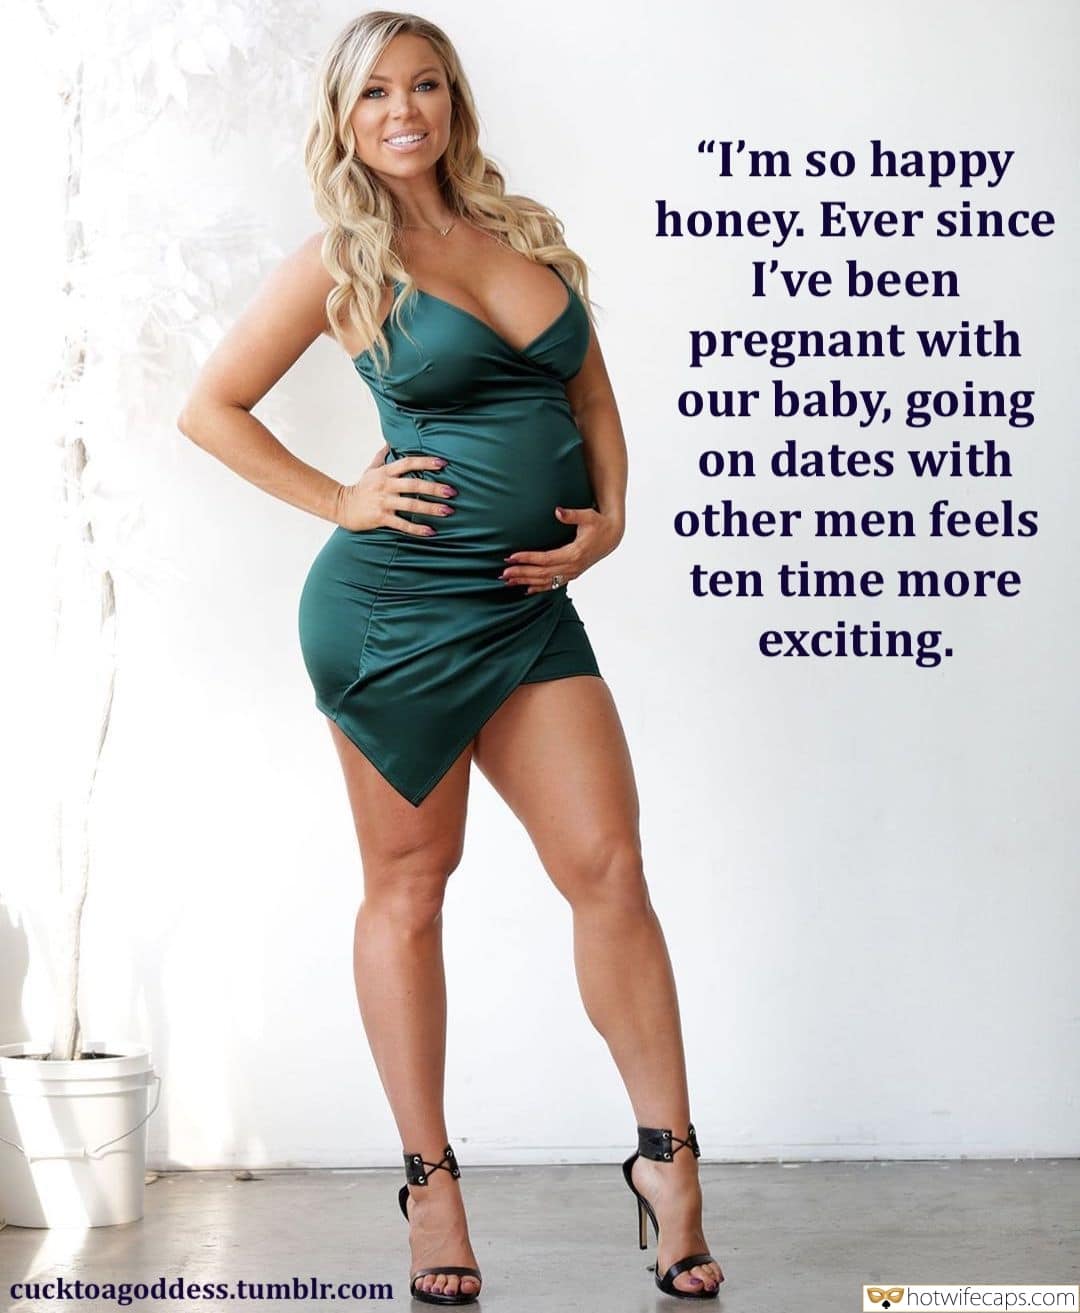 Sexy Memes Humiliation hotwife caption: “I’m so happy honey. Ever since I’ve been pregnant with our baby, going on dates with other men feels ten time more exciting. cucktoagoddess.tumblr.com getting stepmom pregnant xxx captions Hotwife pregnant sex captions Voluptuous Pregnant Blonde in Green Dress